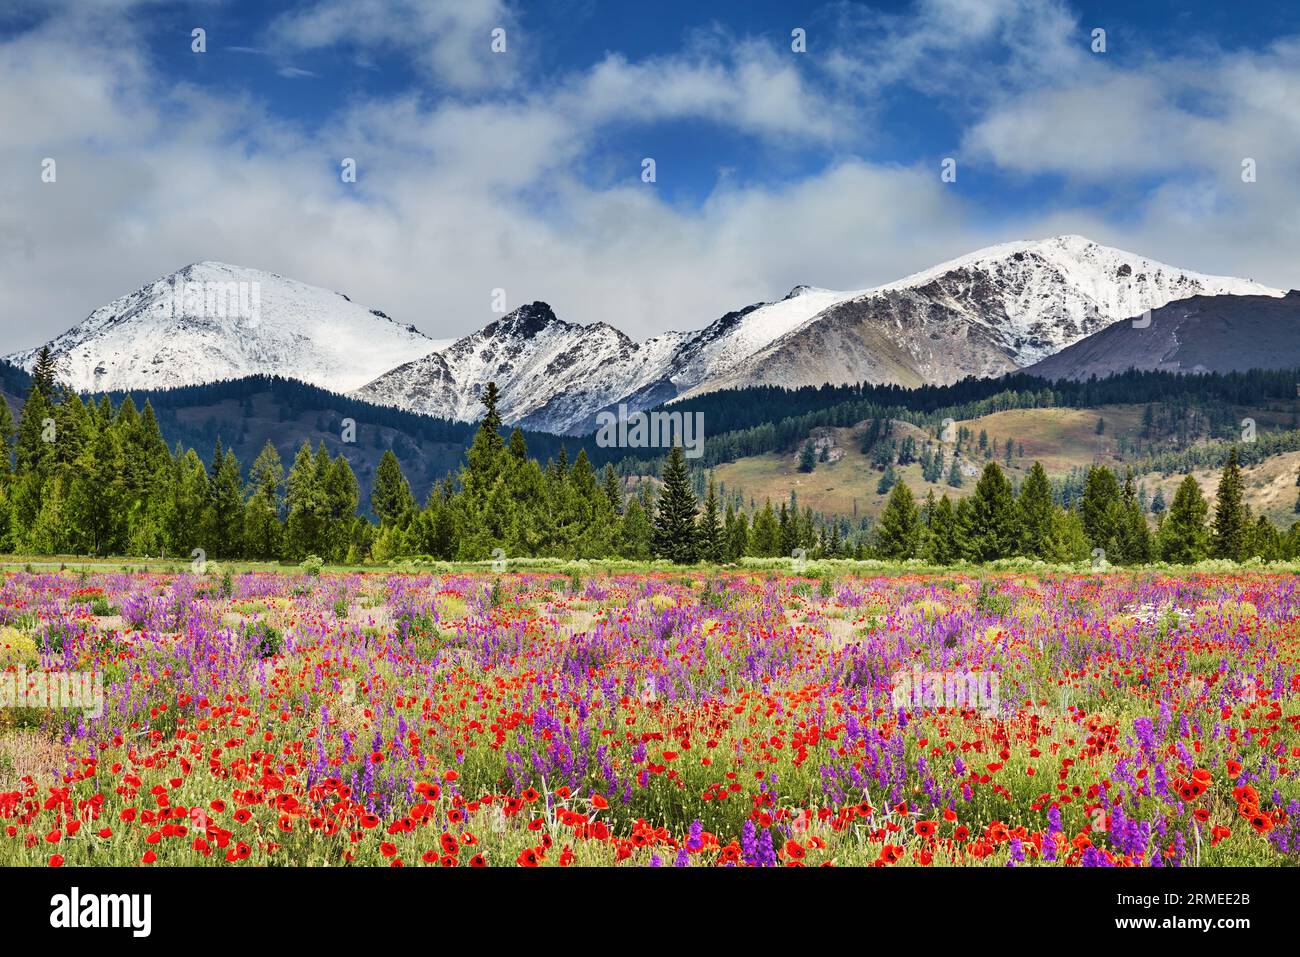 Landscape with snowy mountains, forest and blossoming field with wildflowers Stock Photo